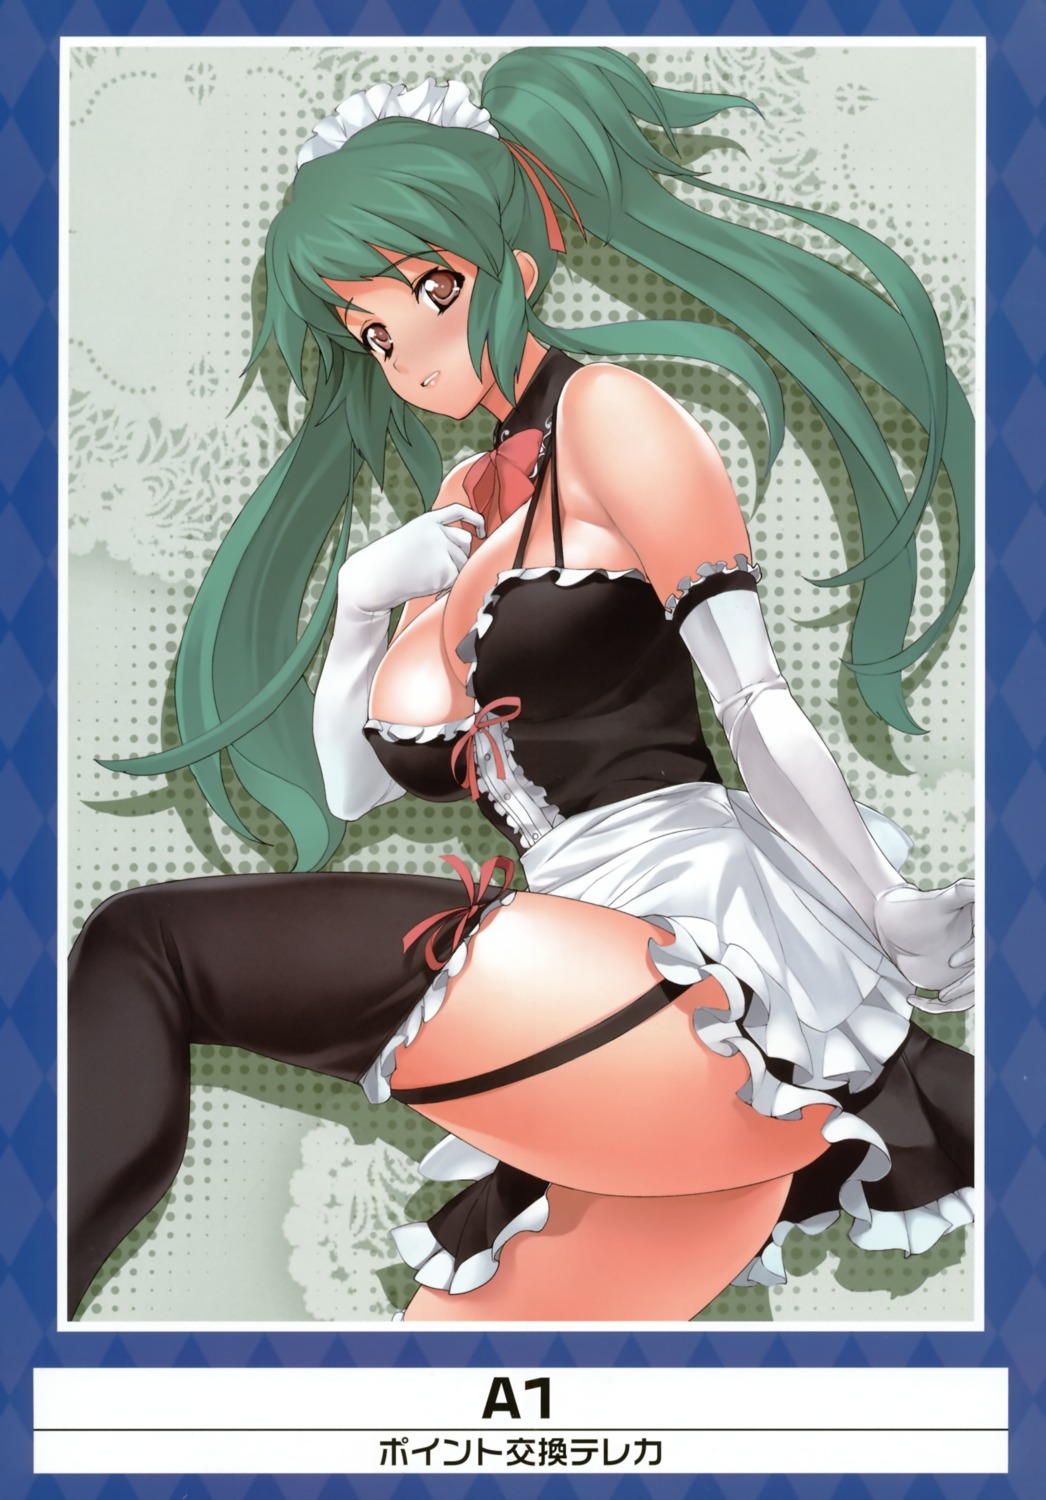 a1 cleavage maid thighhighs